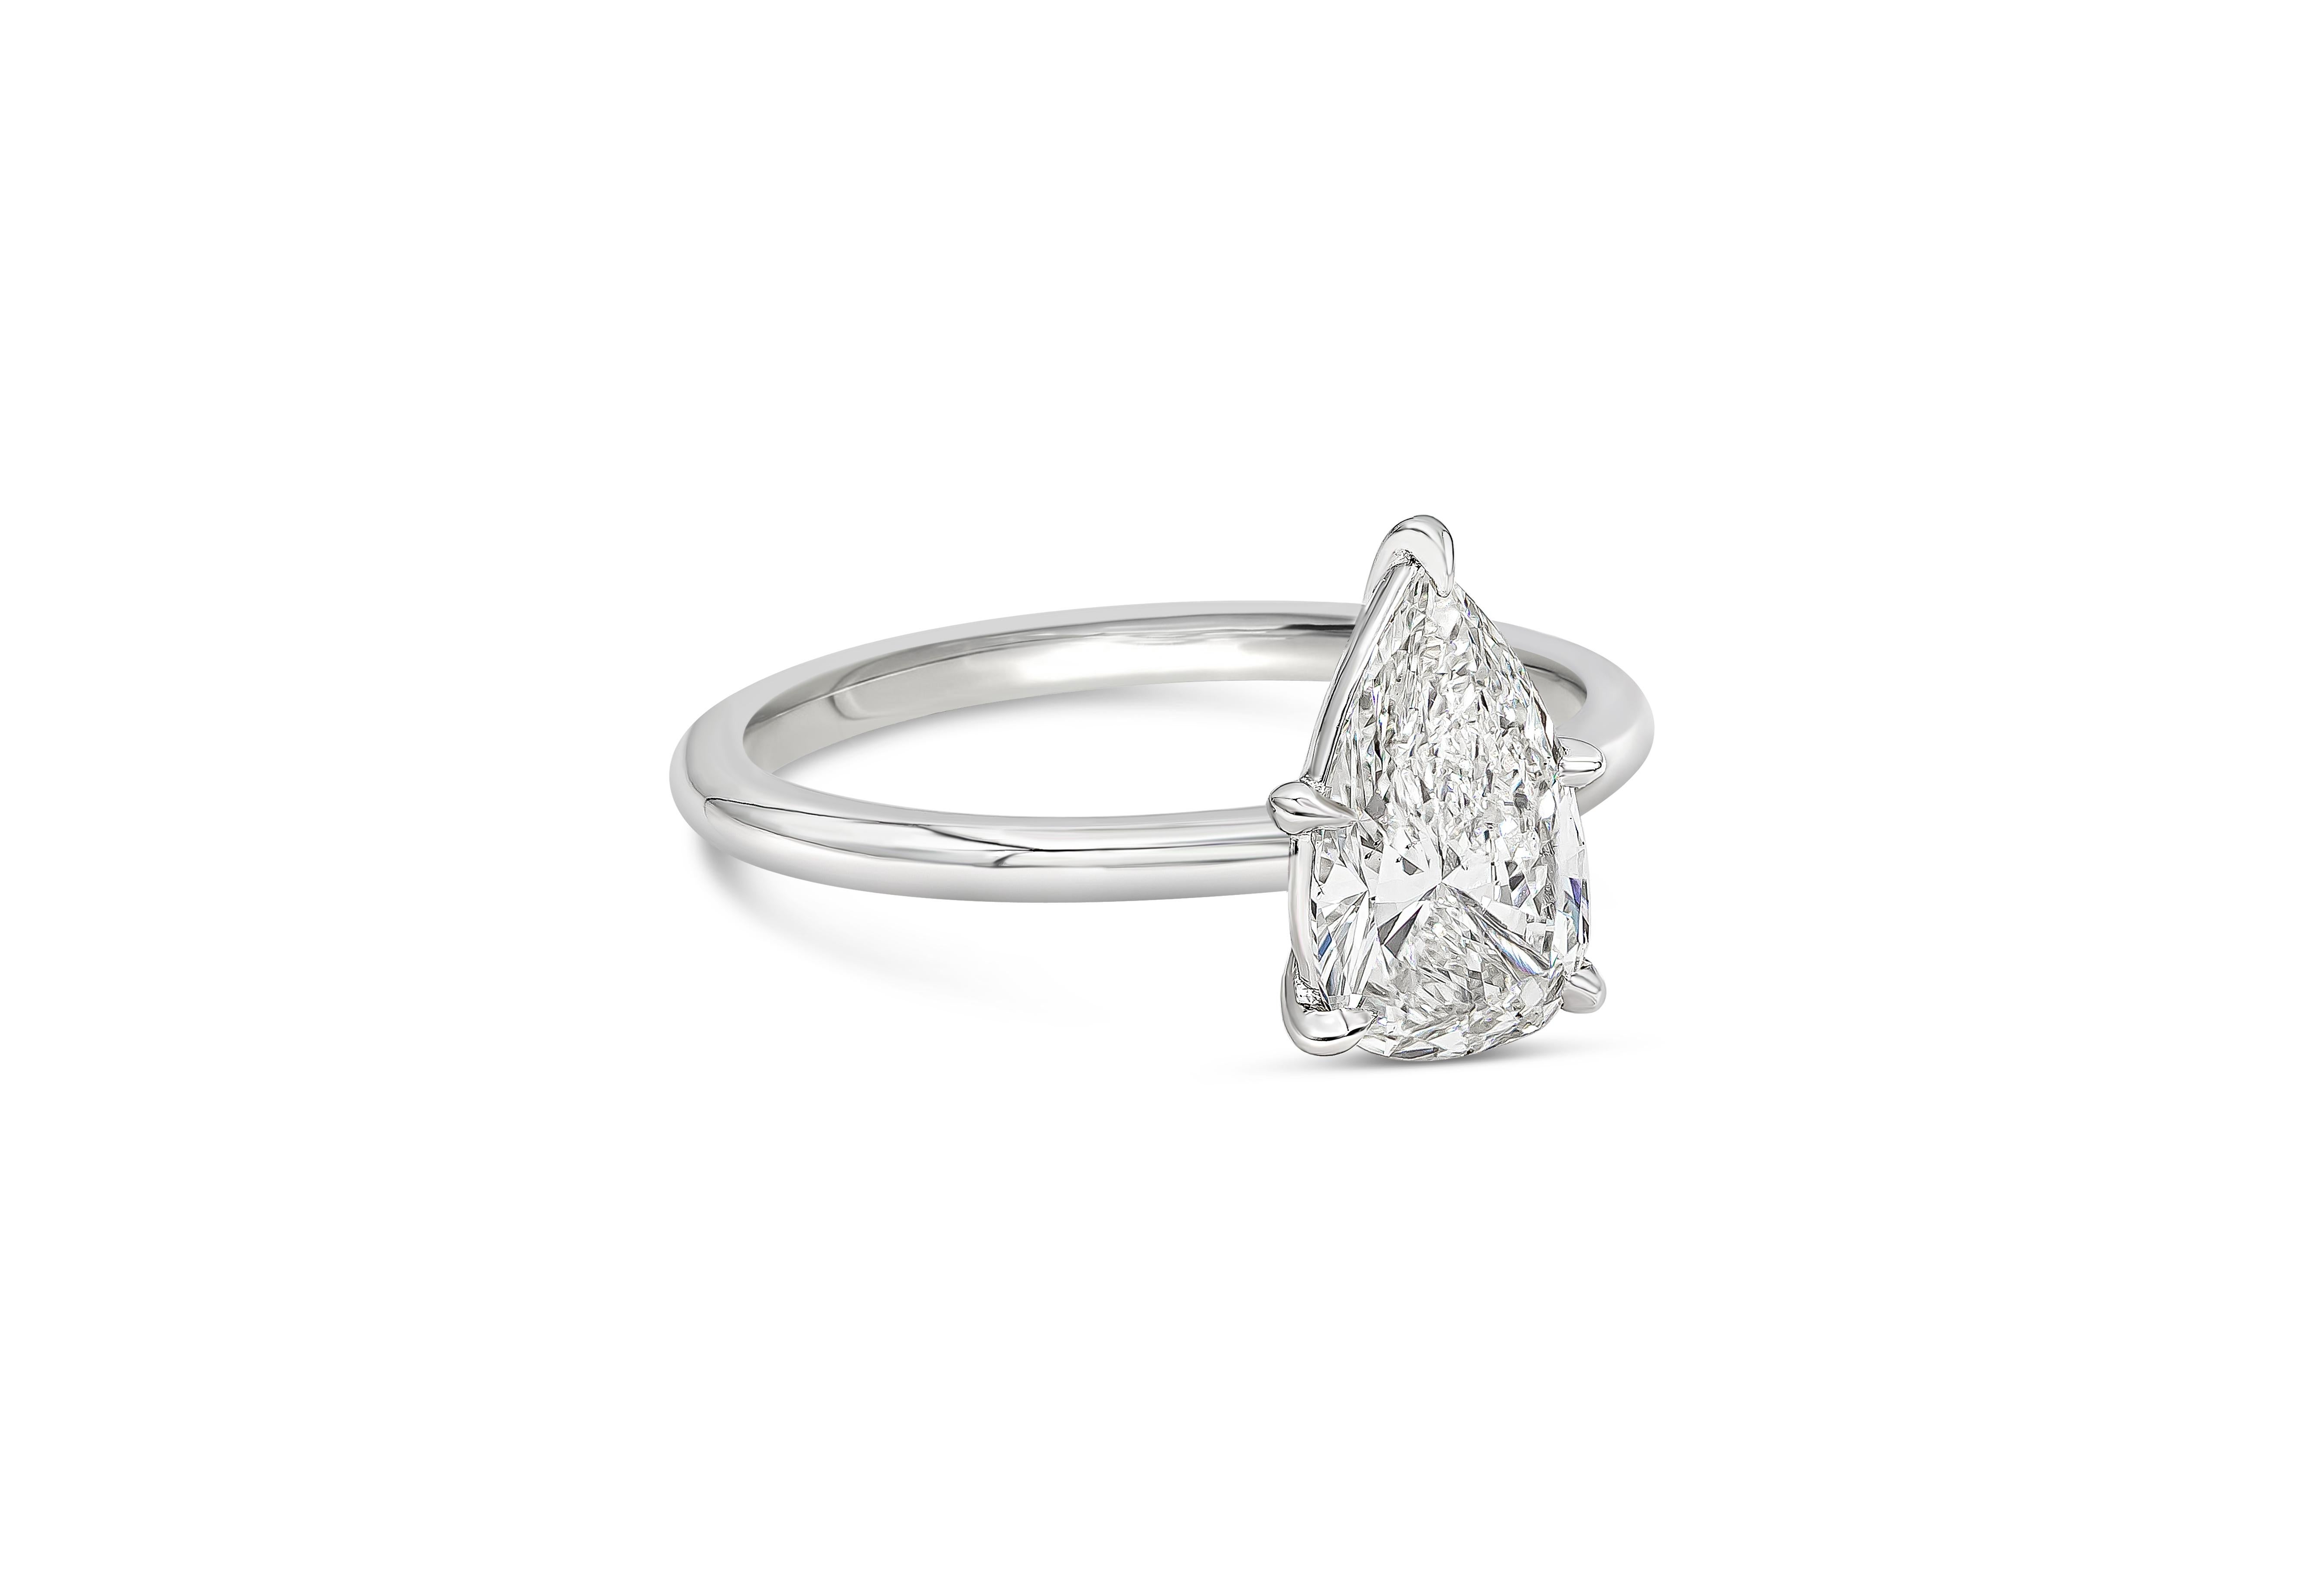 A classic and timeless engagement ring style showcasing a 1.28 carats pear shape diamond certified by GIA as I color and SI1 in clarity, set in a five prong basket setting and thin platinum band. Size 6.5 US resizable upon request.

Roman Malakov is